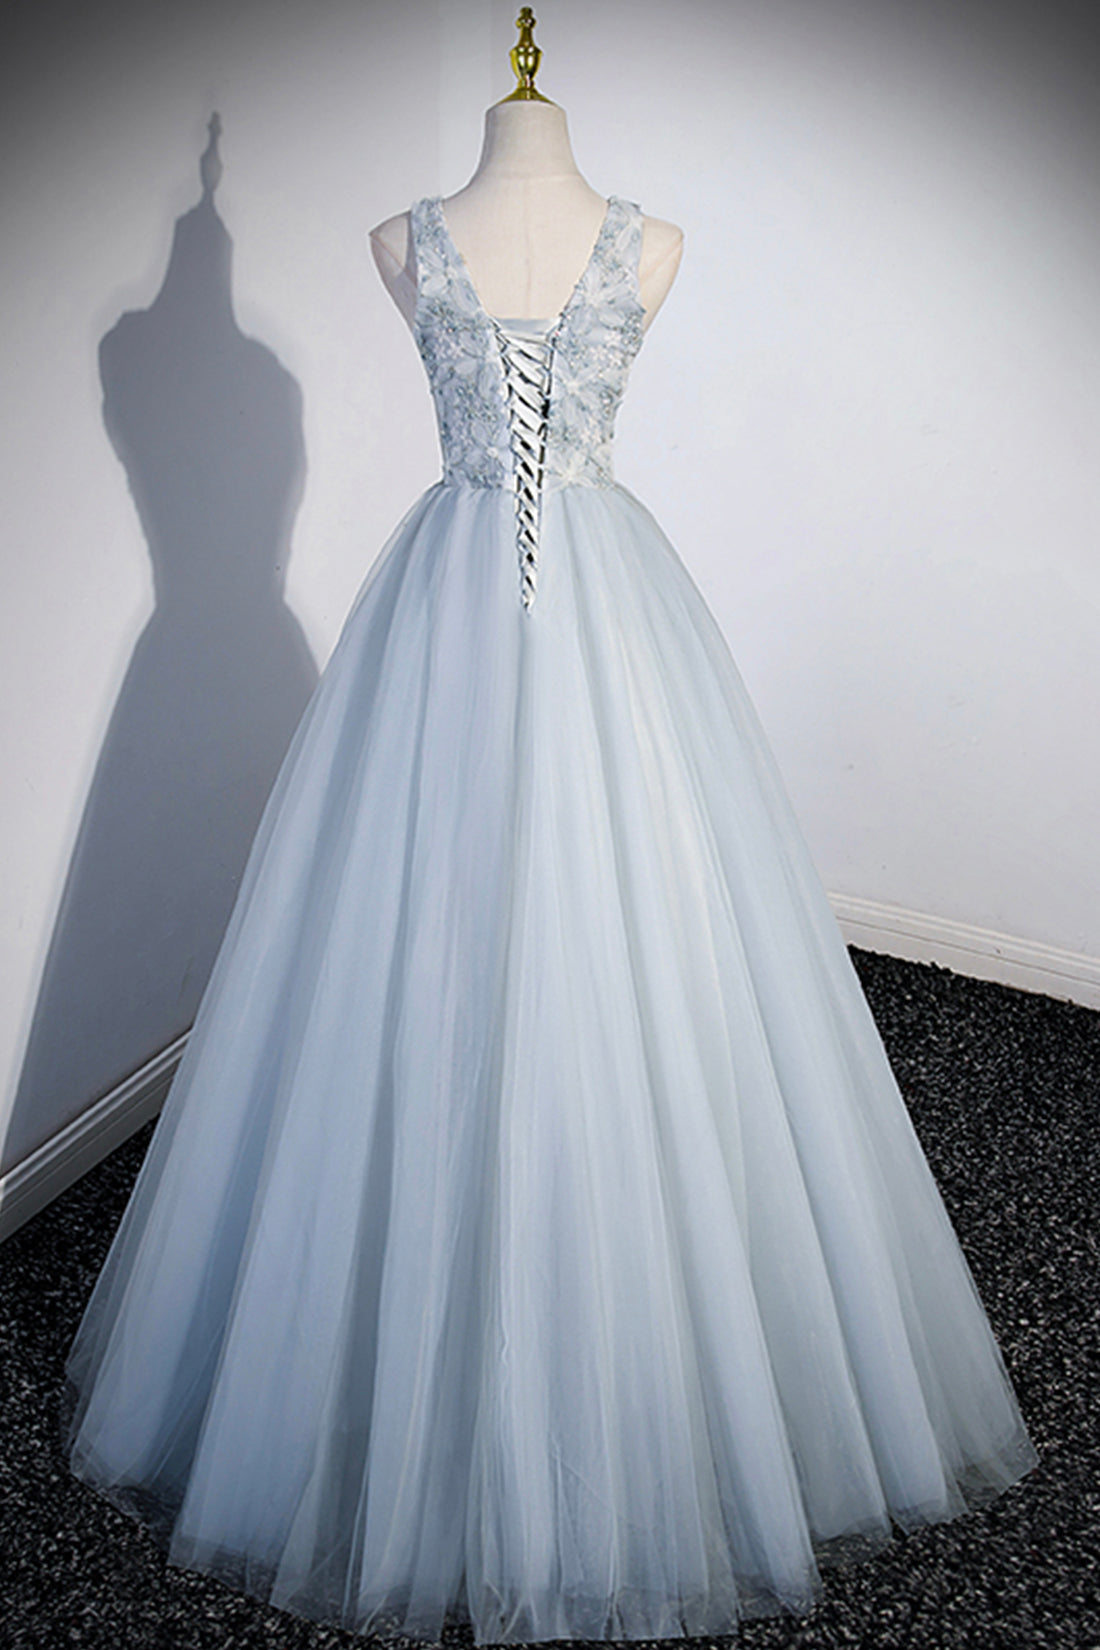 Cute V-Neck Tulle Long Prom Dress, Gray Evening Dress Party Dress